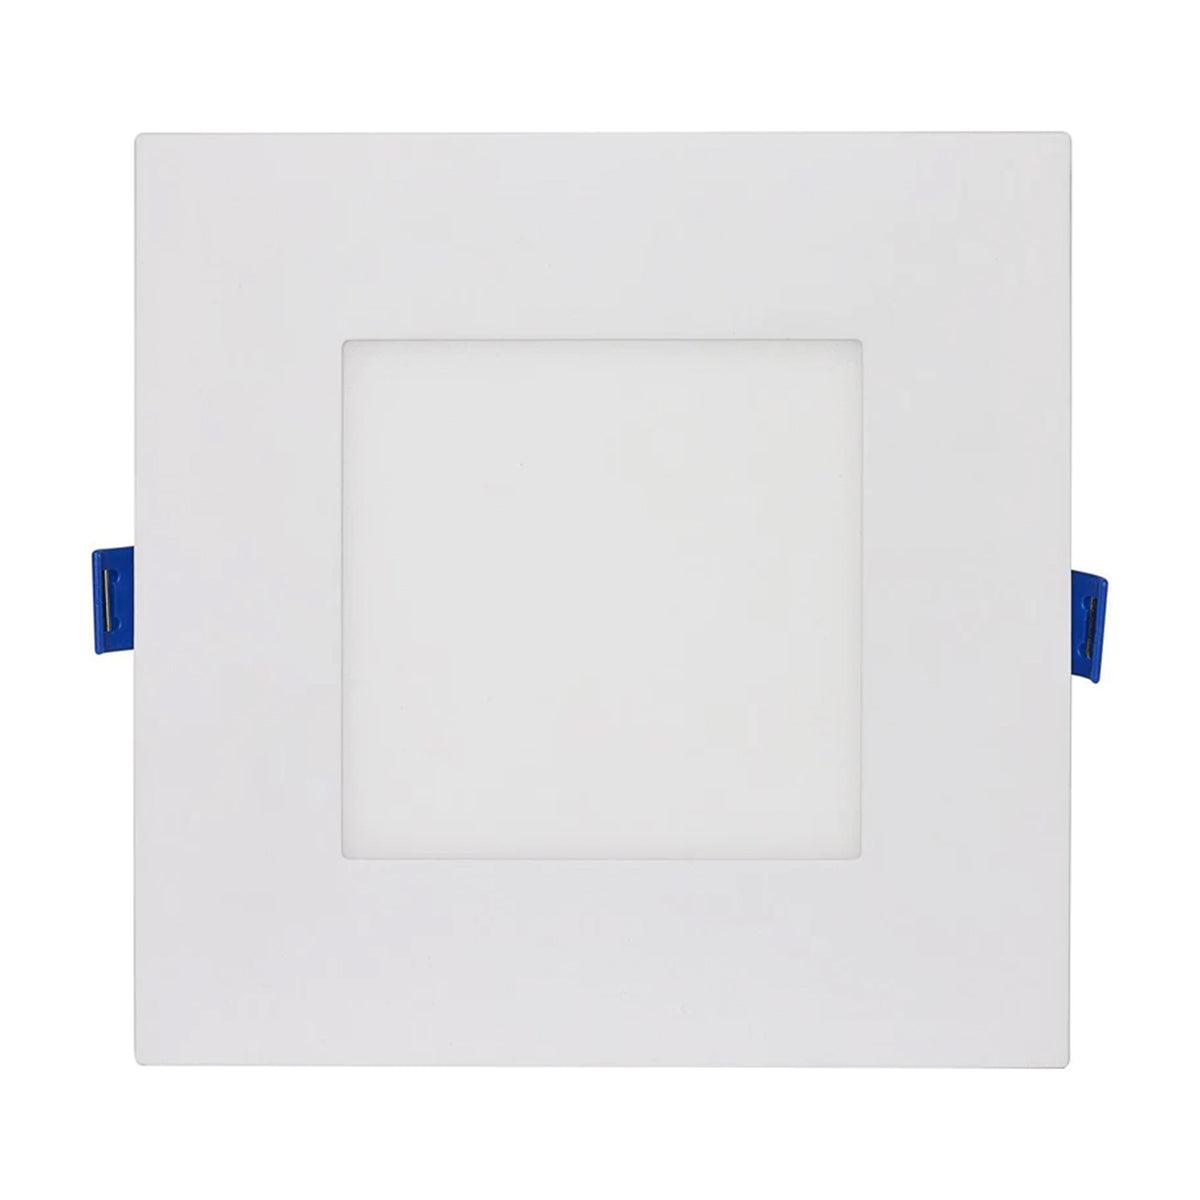 Satco Starfish, Flat Lens, 6 inch, Square Smart Canless LED Recessed Light, 12 Watt, 750 Lumens, Selectable CCT 2000K to 5000K RGB/Tunable White - Bees Lighting